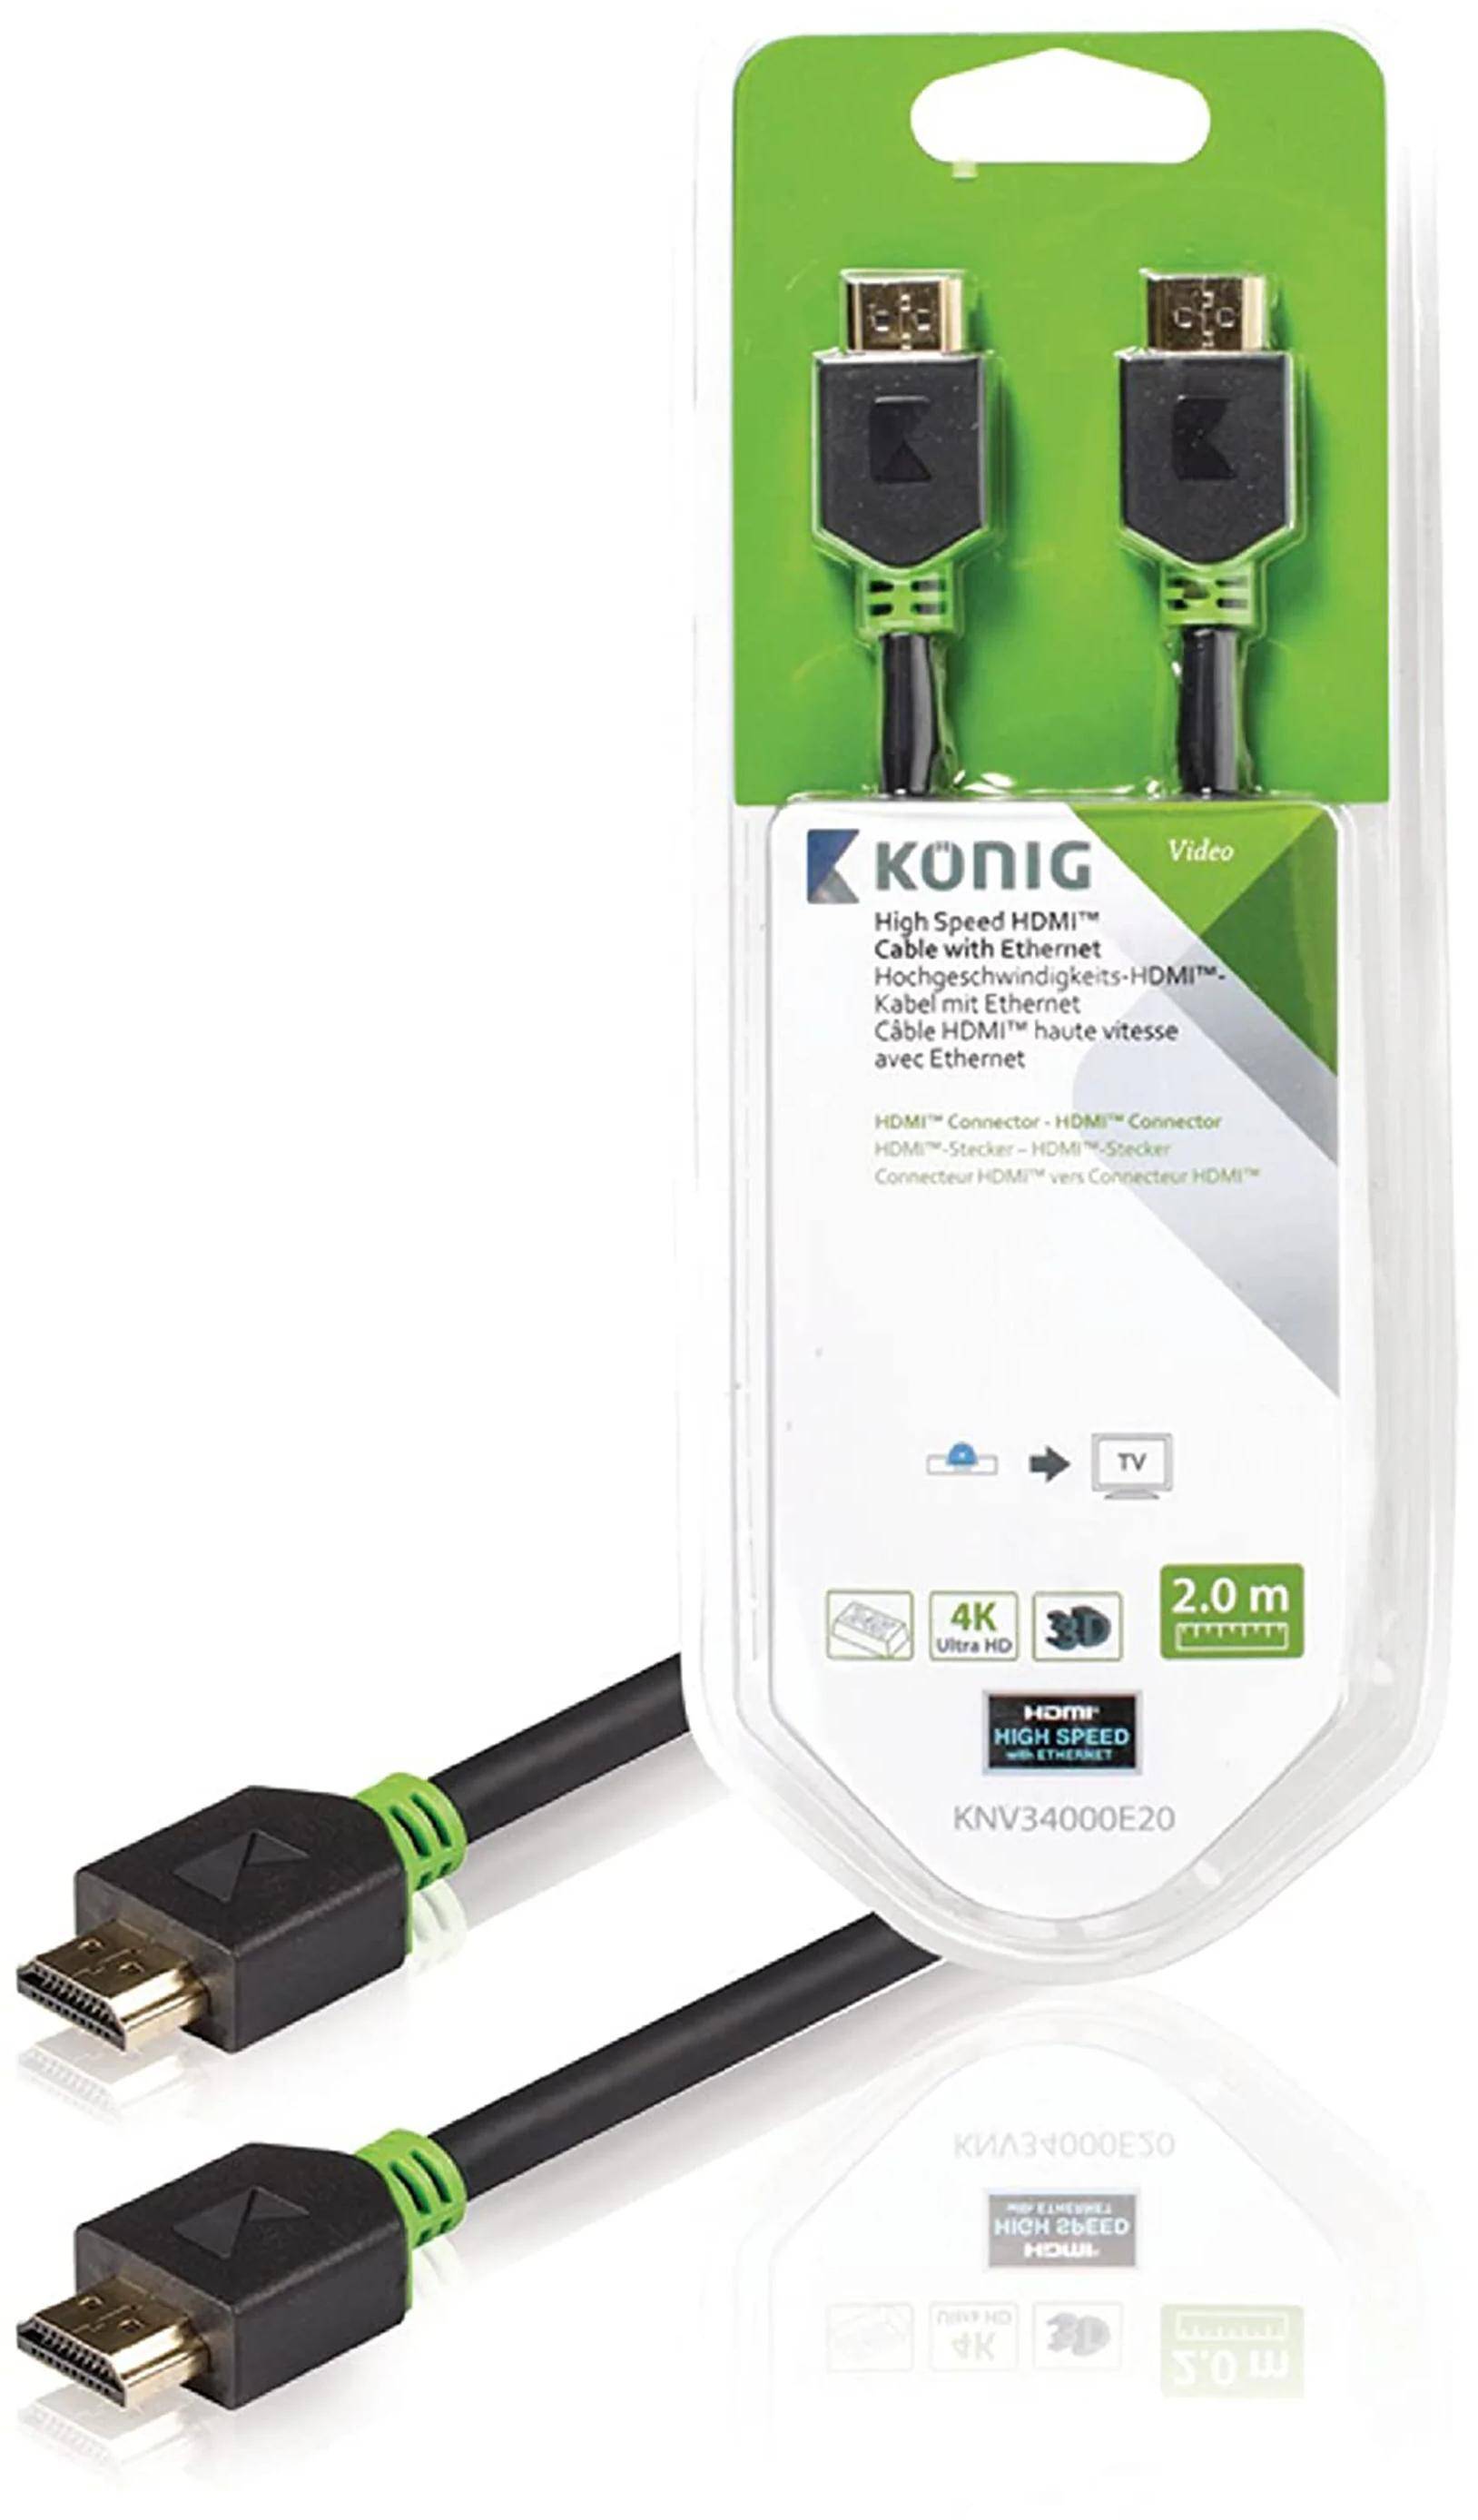 Konig High Speed HDMI Cable with HDMI Connector Data Cables 2 Meter zoom image